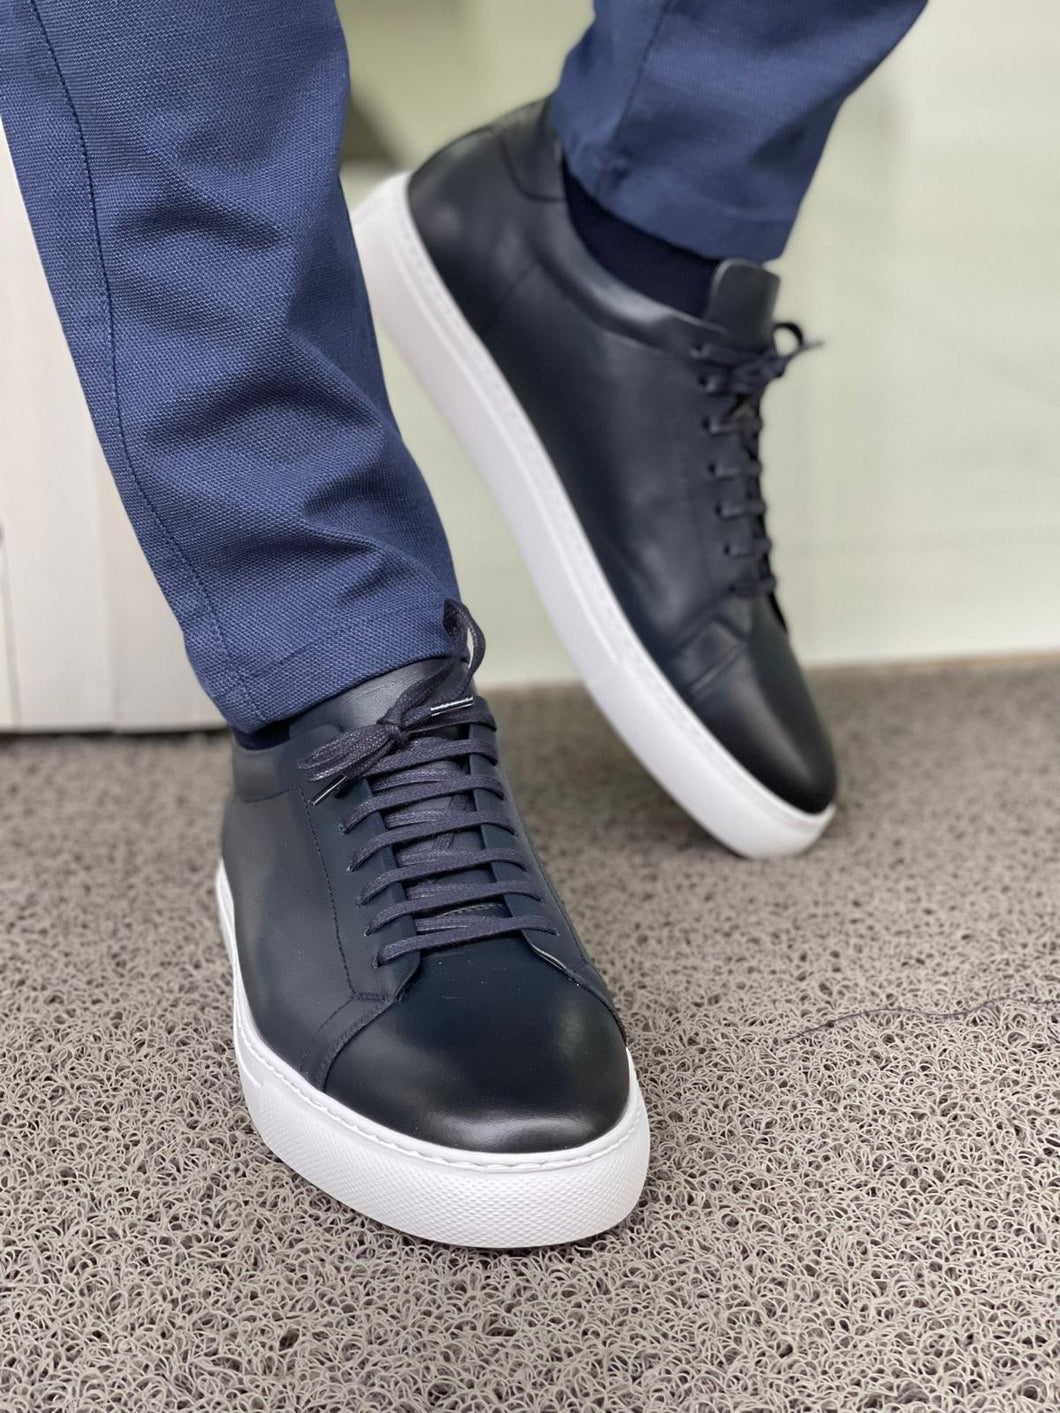 Opstå Giftig kandidatskole Cameron Special Edition Eva Sole Navy Leather Sneakers – MCR TAILOR